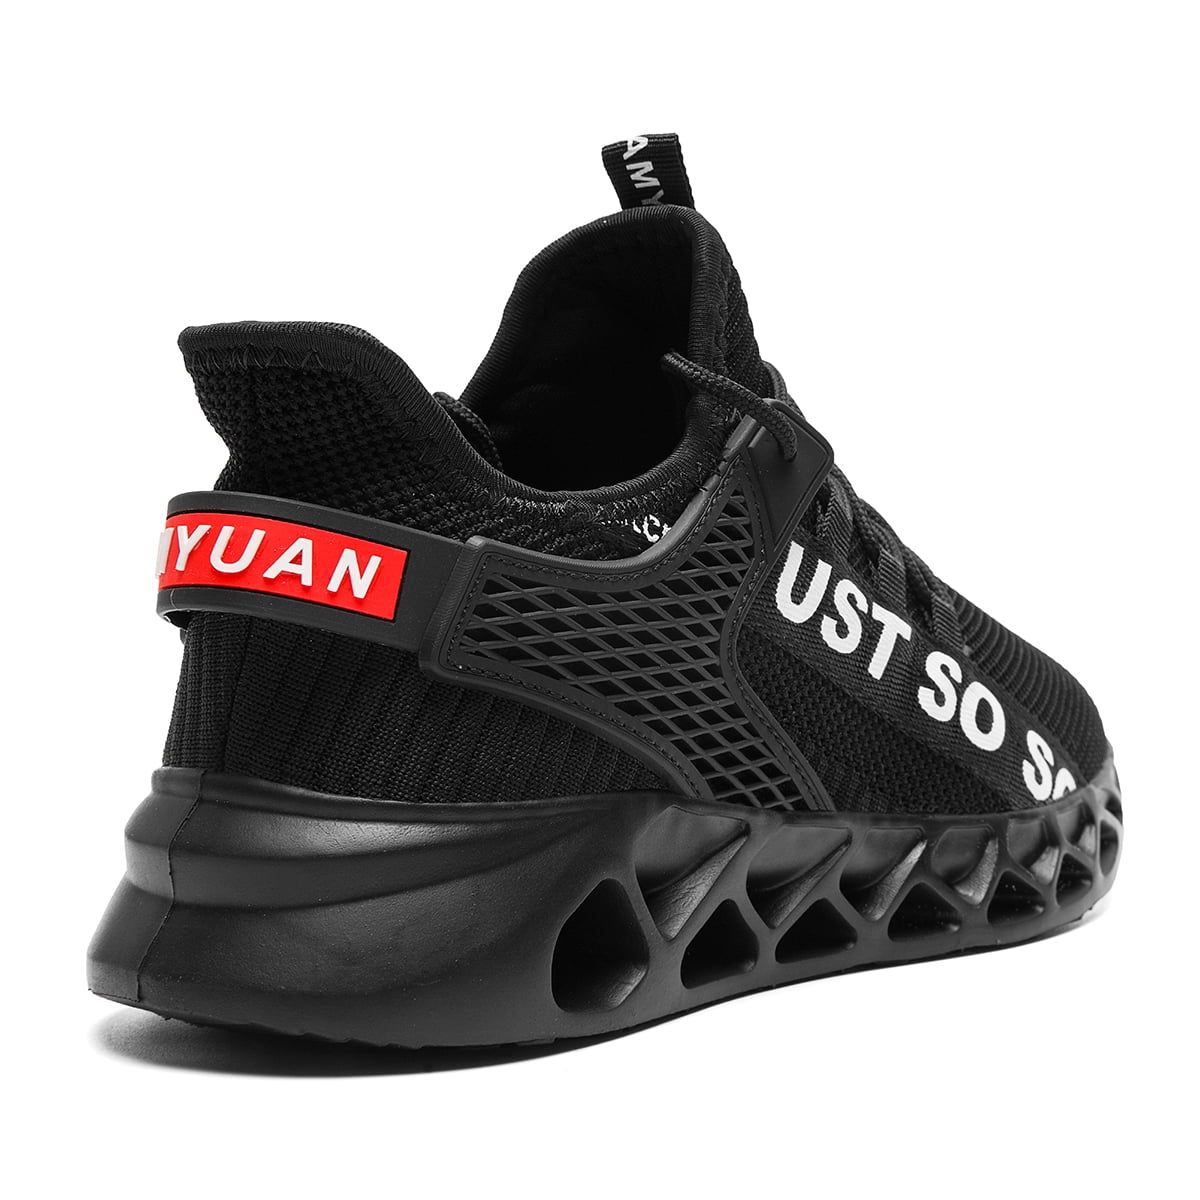 Damyuan Mens Running Walking Gym Athletic Tennis Blade Shoes Fashion Breathable Sneakers